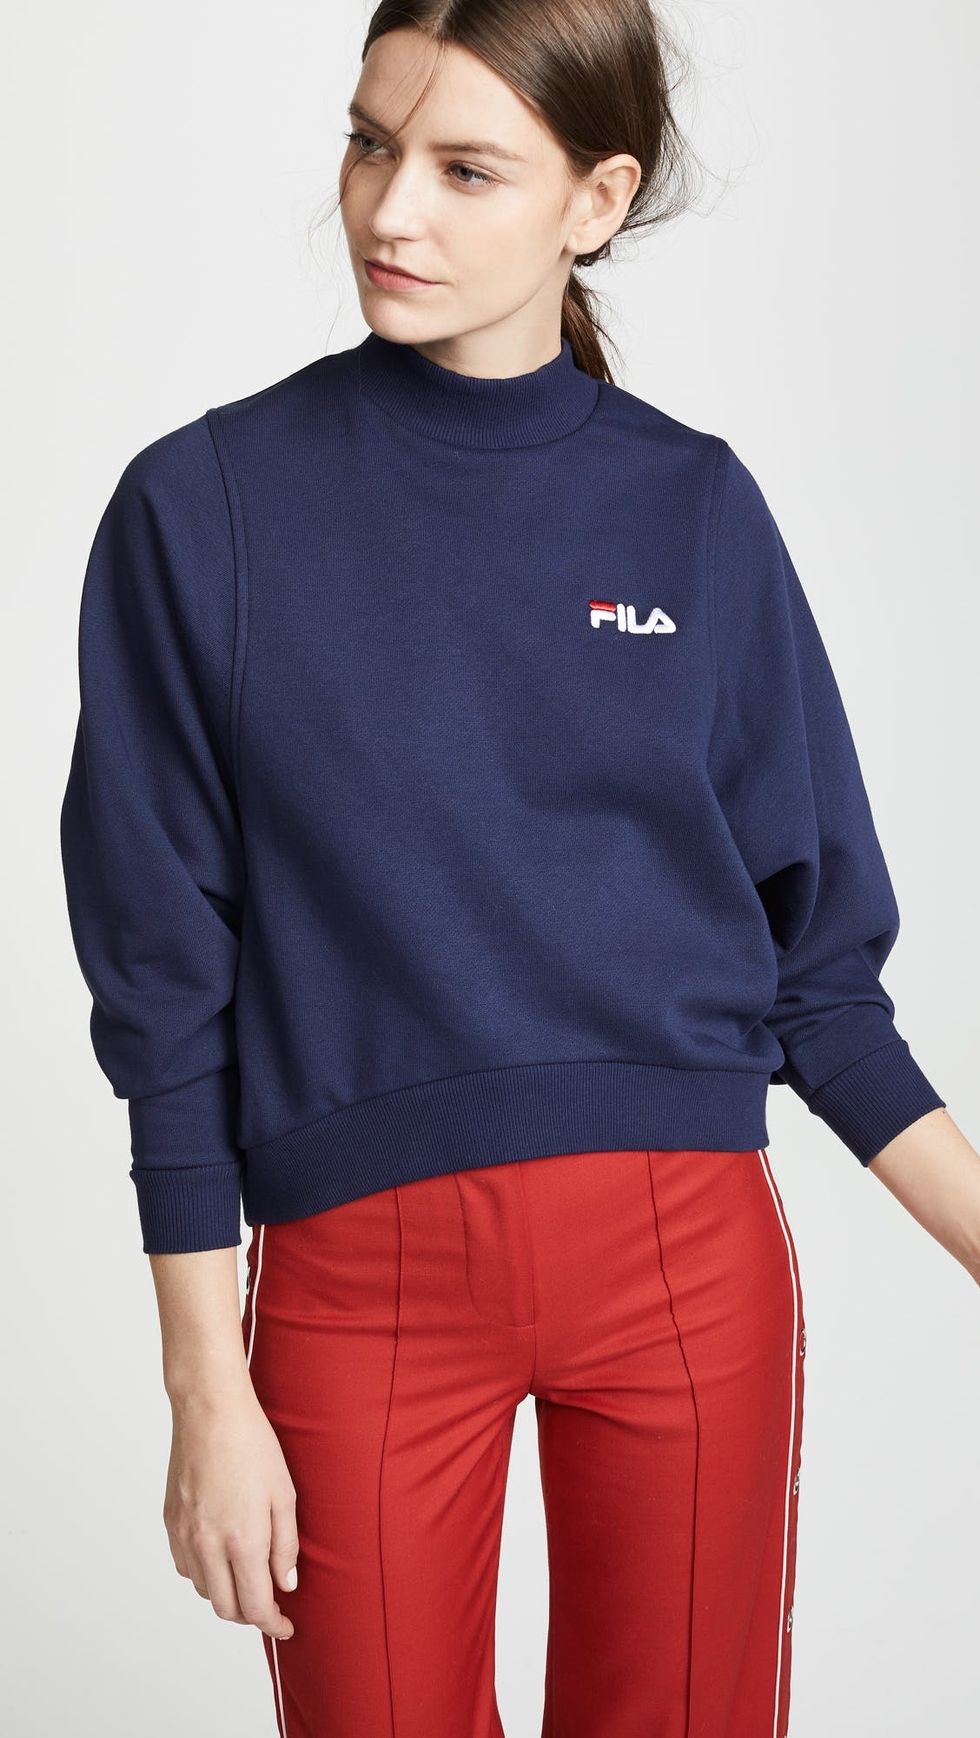 The Coziest ’90s Style Sweatshirts for When You Just Can’t Even - Brit + Co